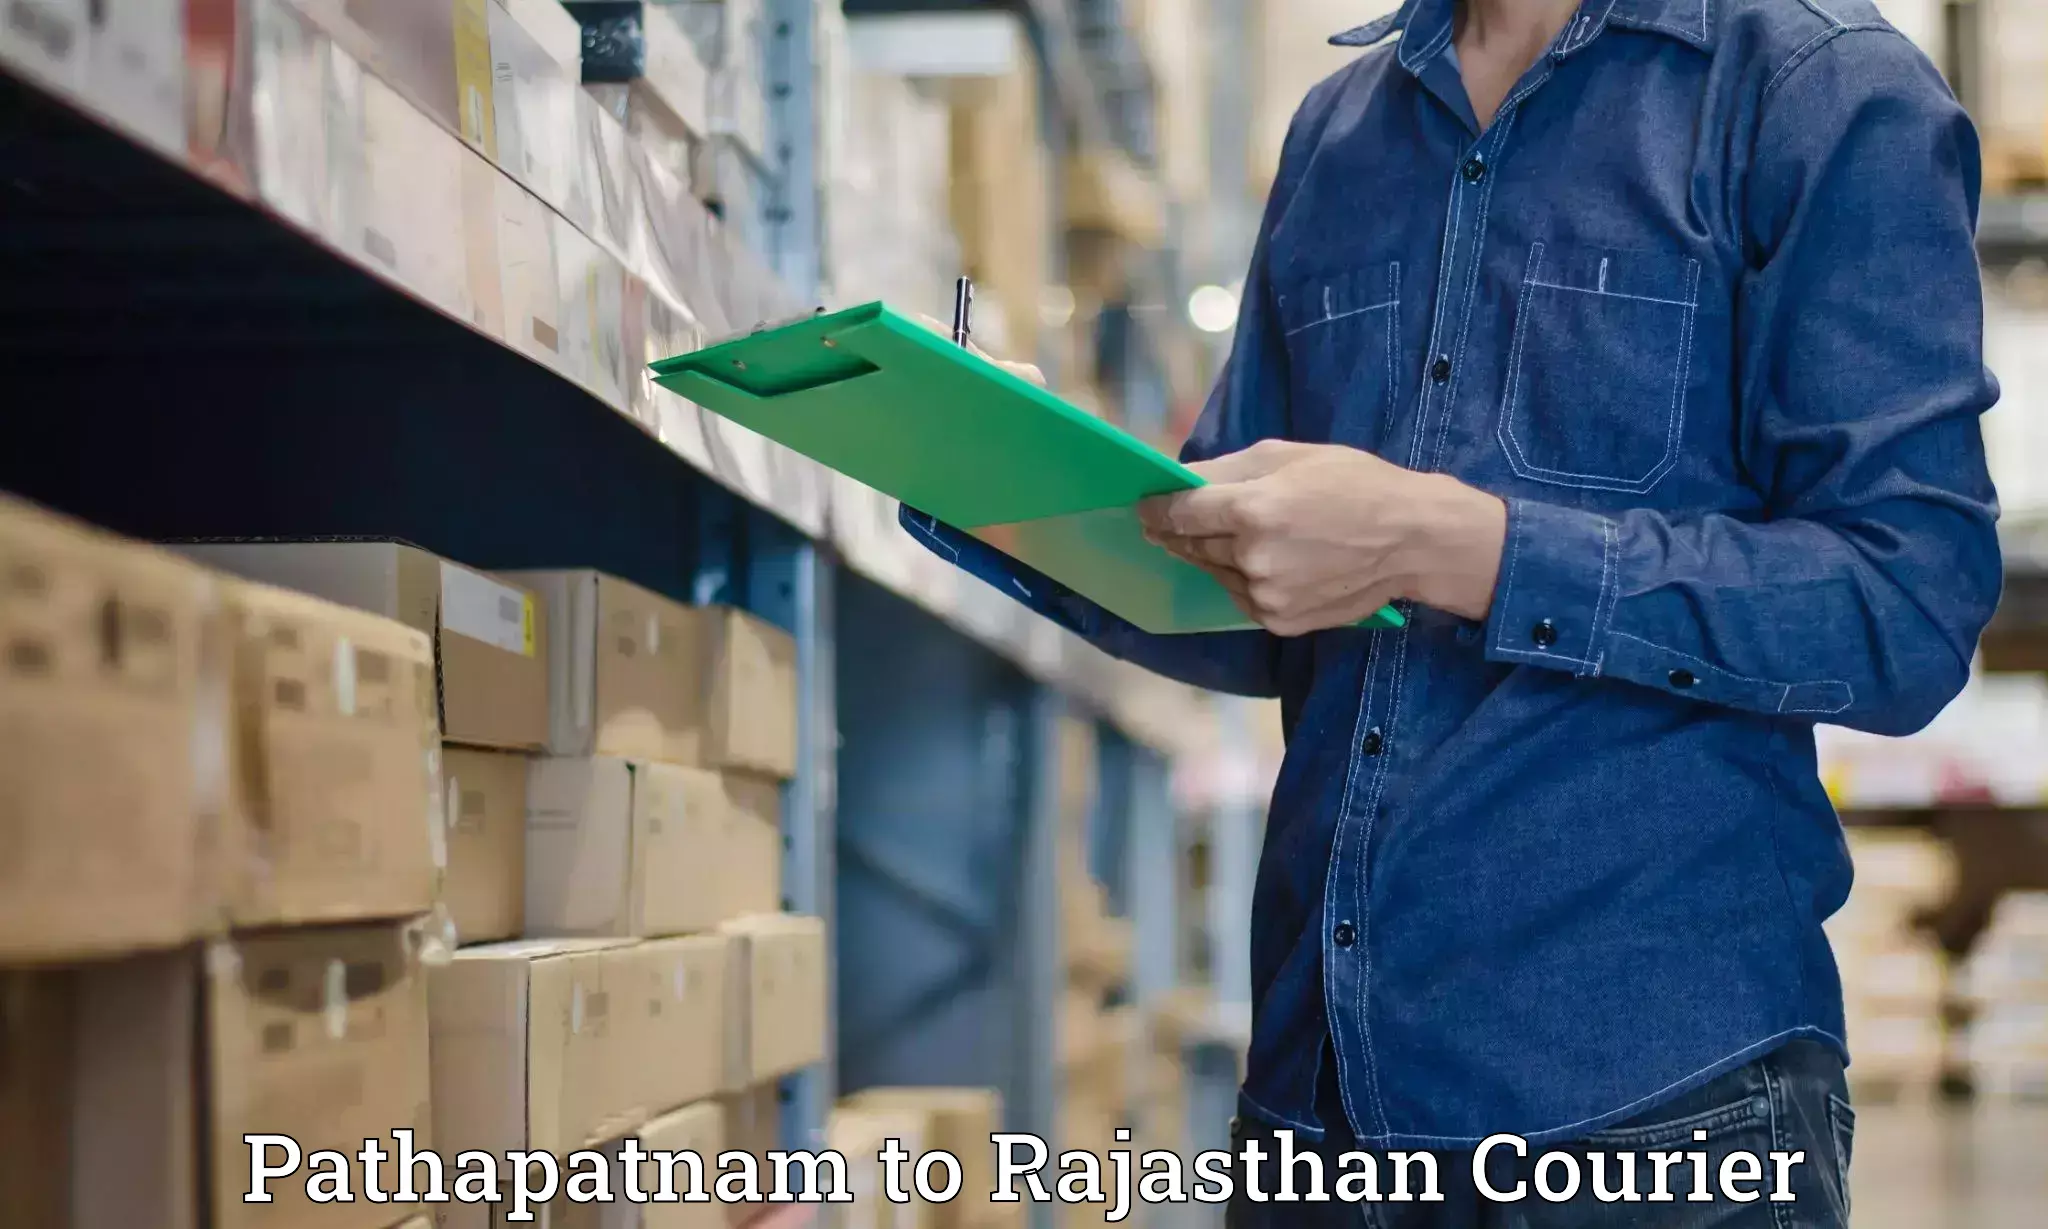 Multi-carrier shipping Pathapatnam to Rajasthan